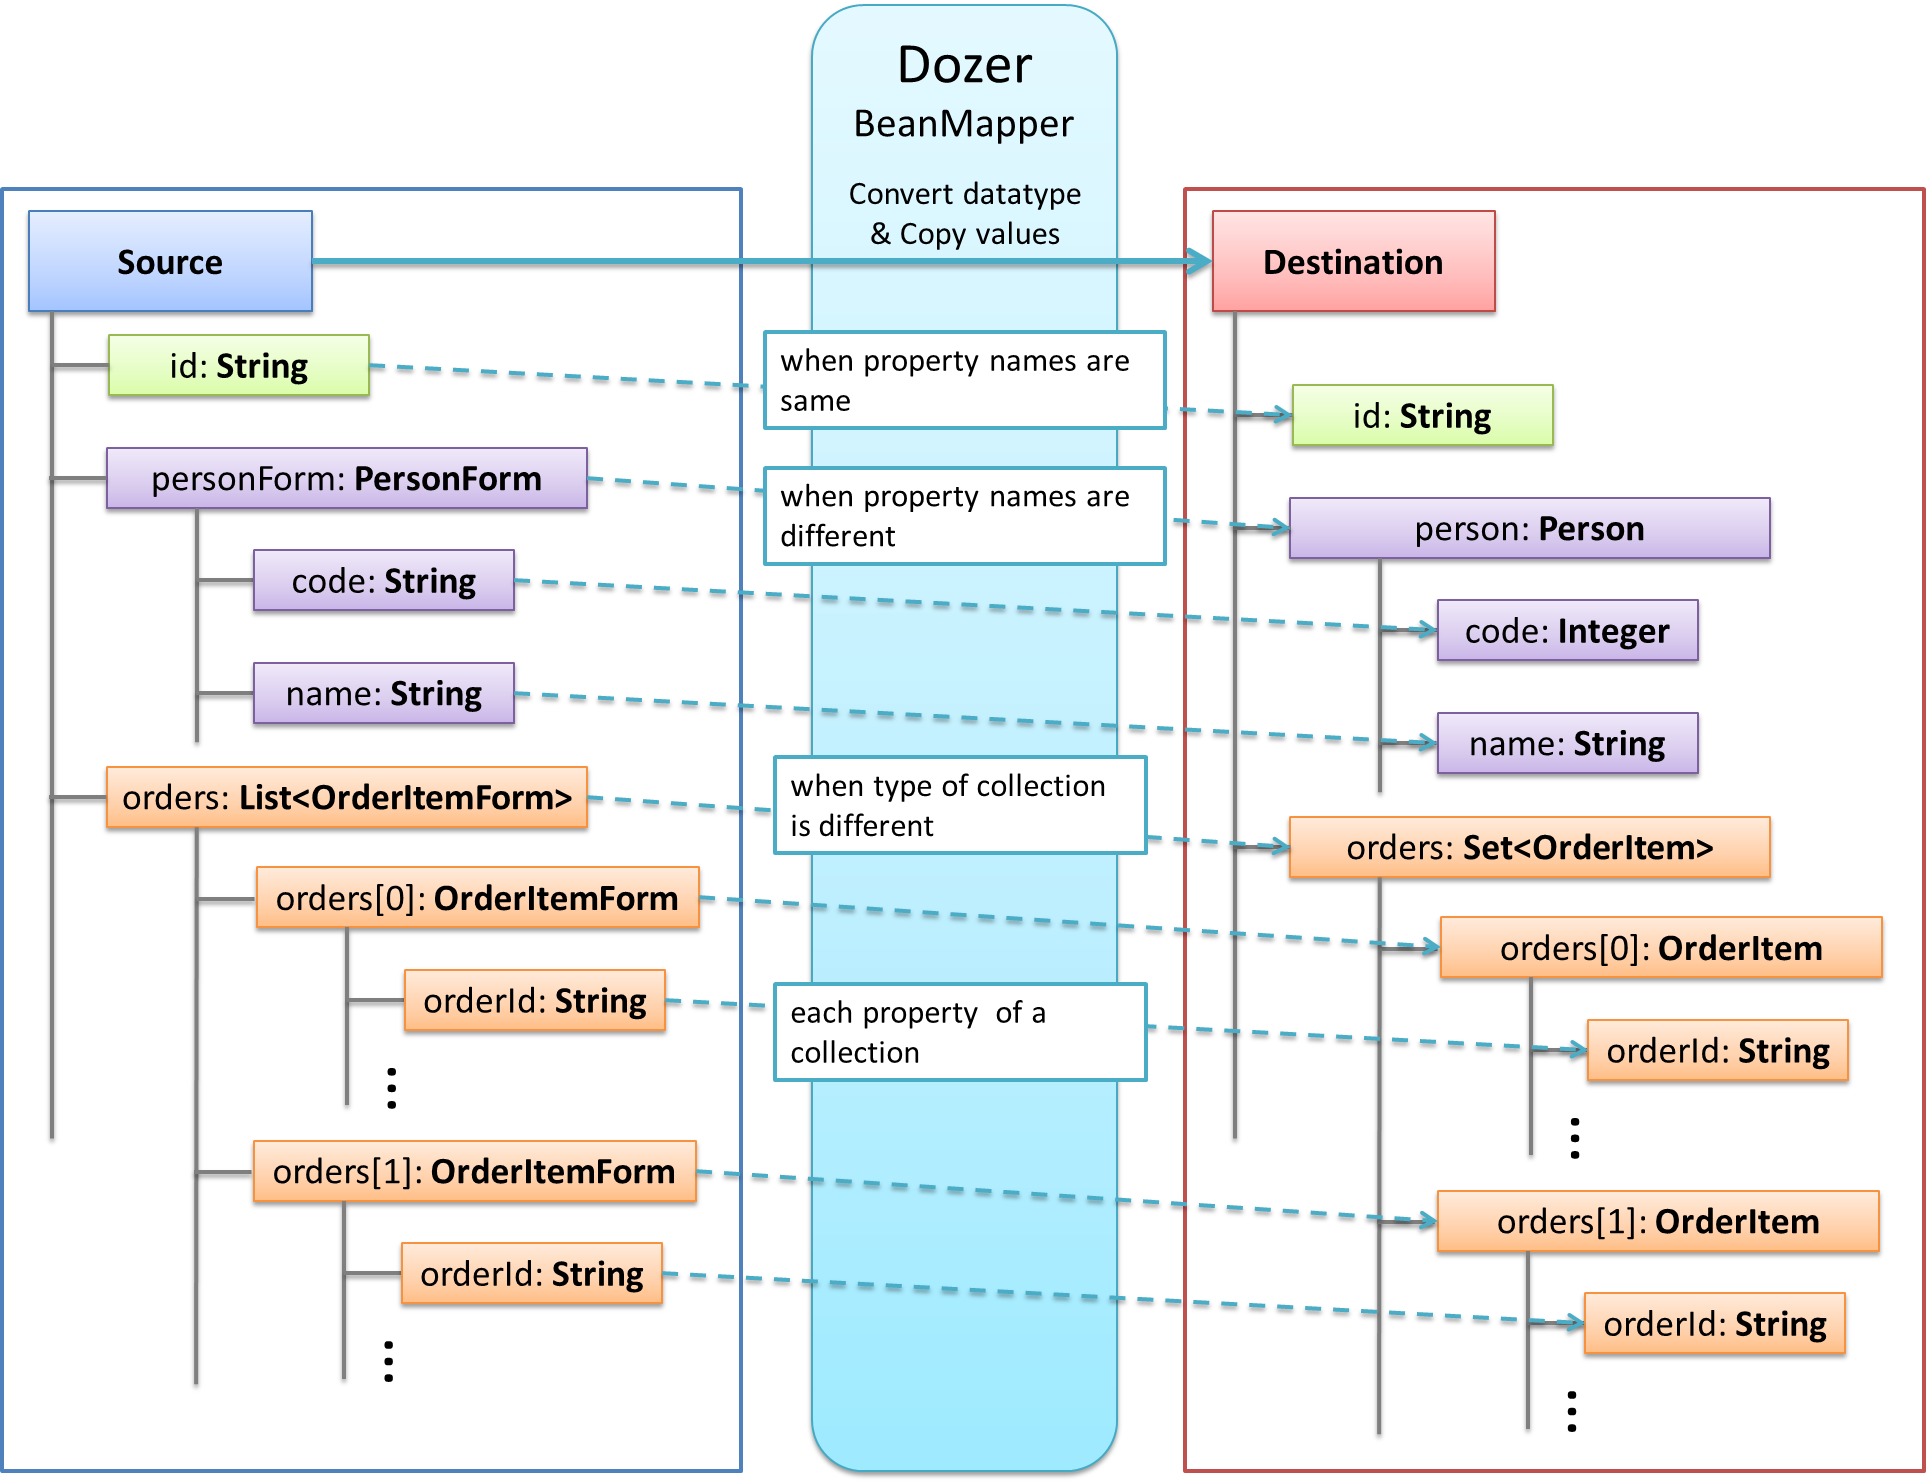 ../../_images/dozer-functionality-overview.png